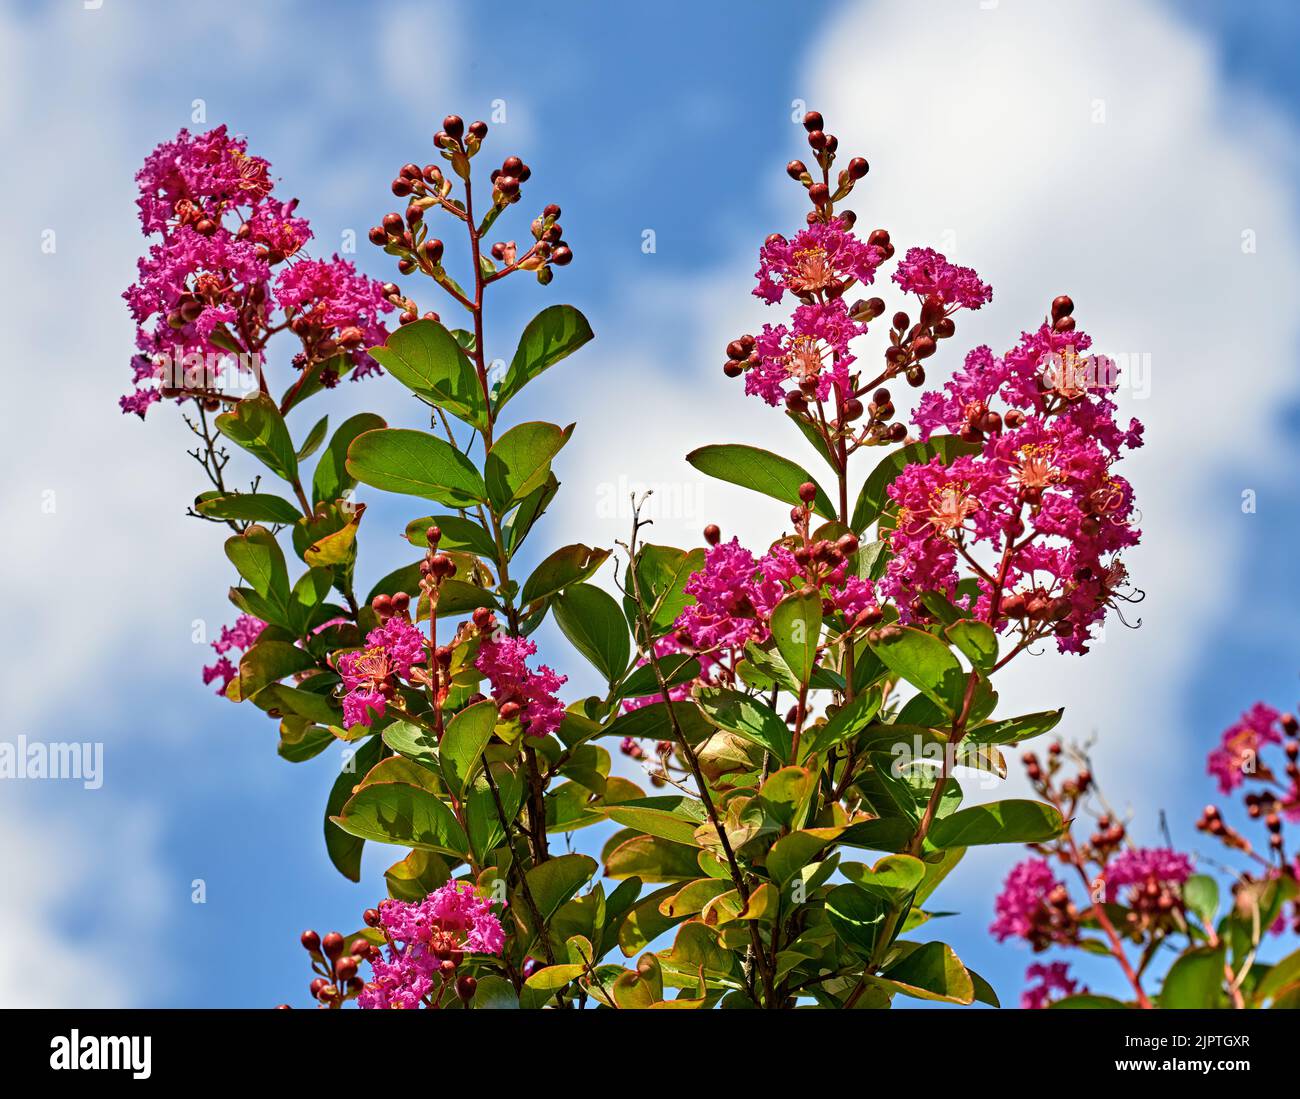 A close up of a pink or purple Crape myrtle.  On a beautiful blue sky background. Stock Photo